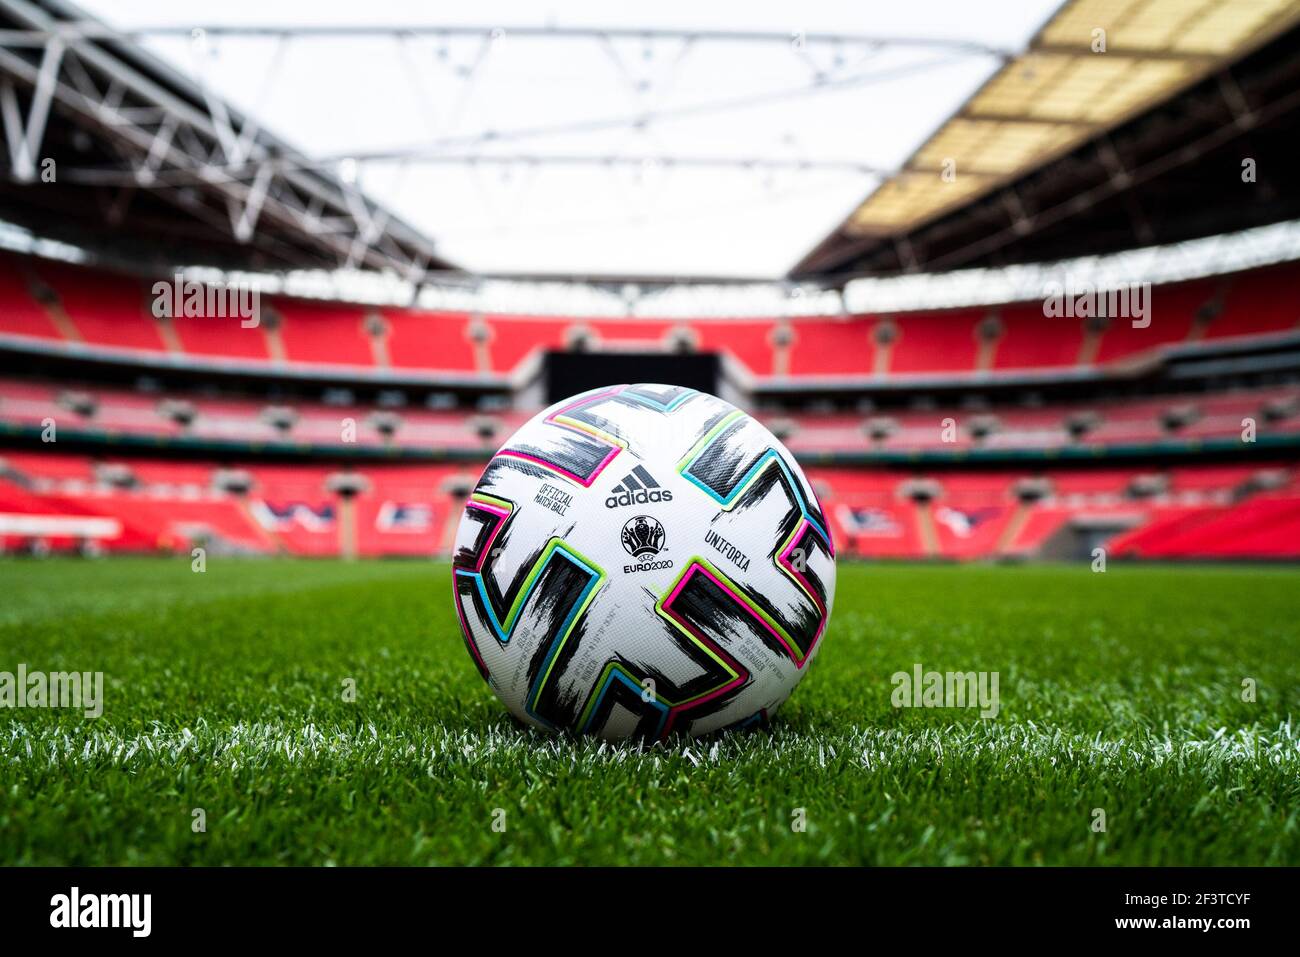 Adidas Official match ball for Champions League 2018/19 Madrid 19 Final  EDITORIAL ONLY! Adidas via Kolvenbach Stock Photo - Alamy